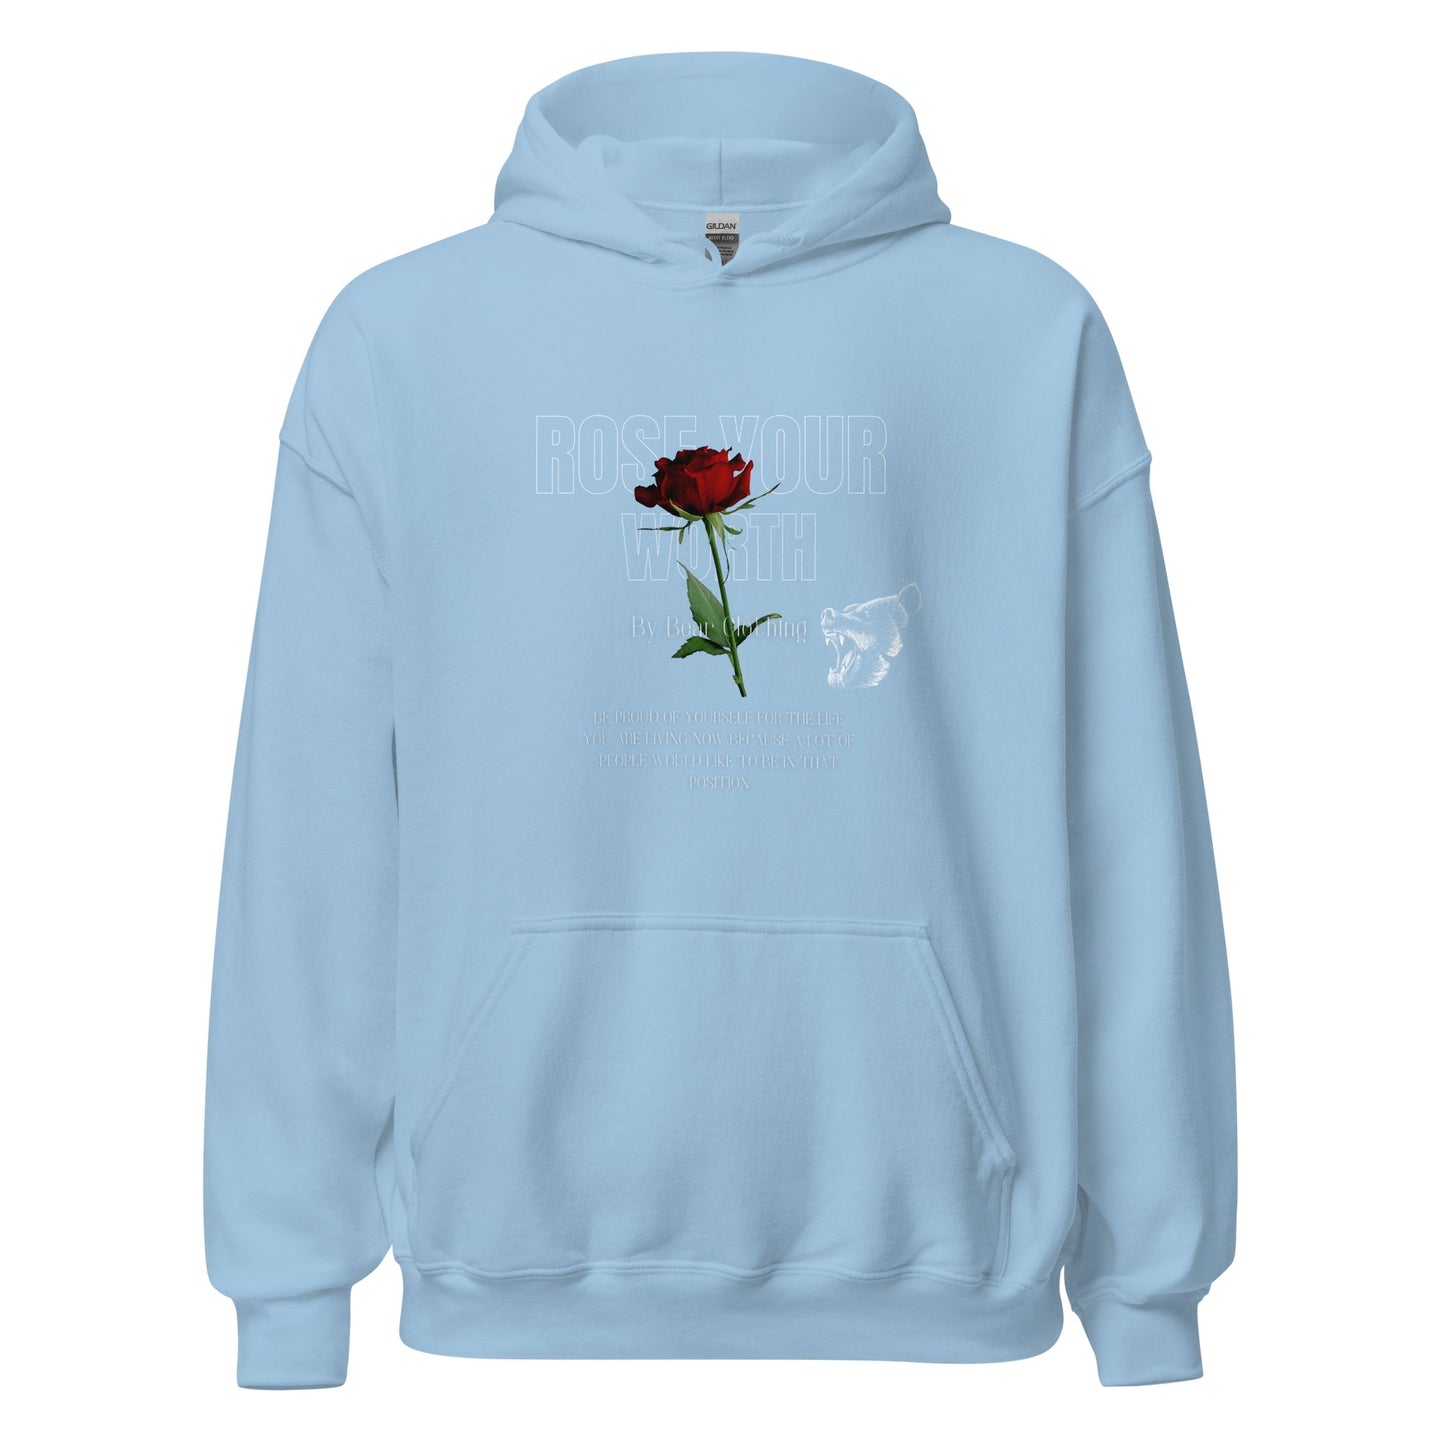 Fall Rose Your Worth Hoodie